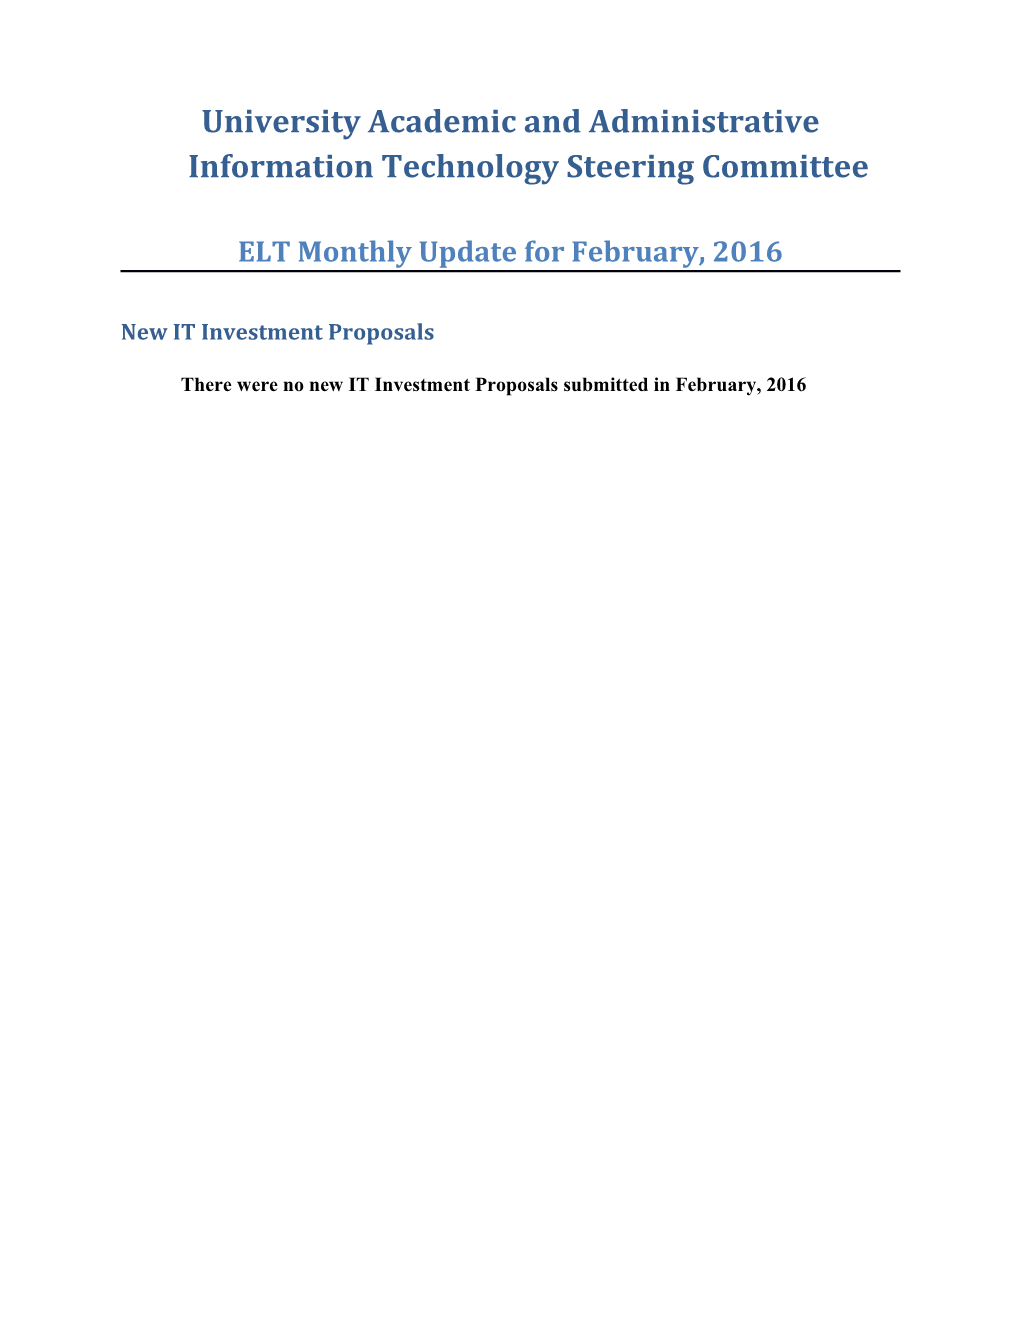 University Academic and Administrative Information Technology Steering Committee s2